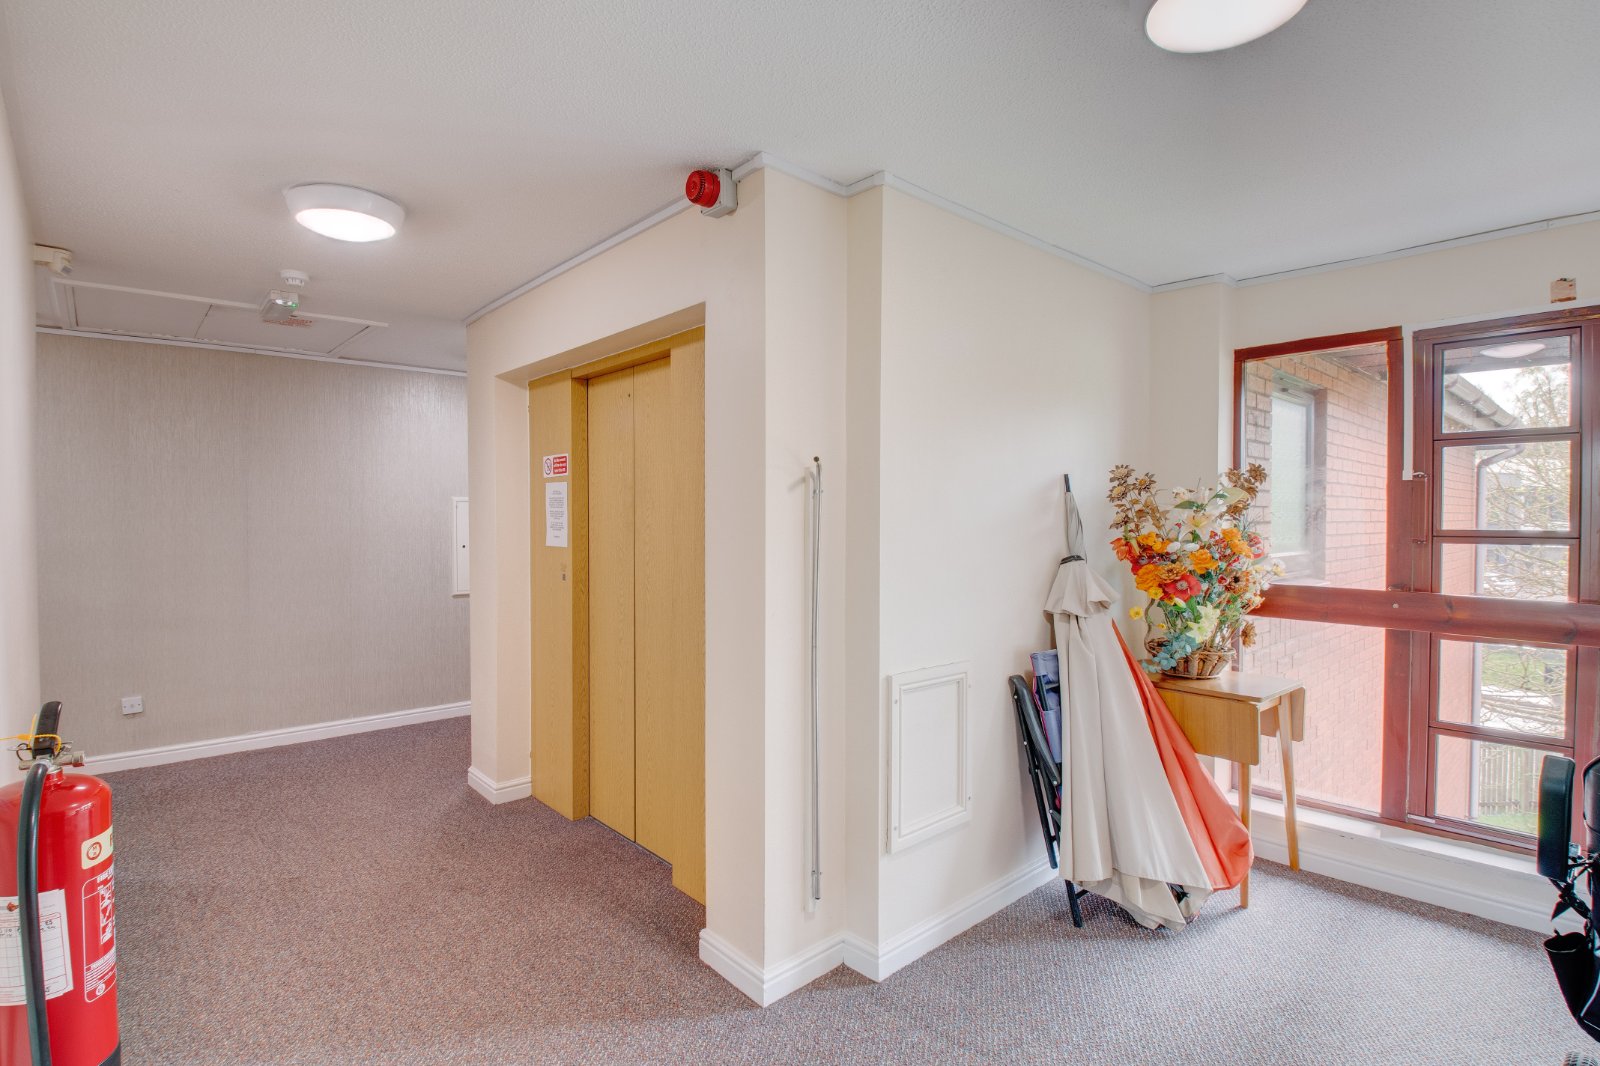 1 bed  for sale in Housman Park, Bromsgrove  - Property Image 10